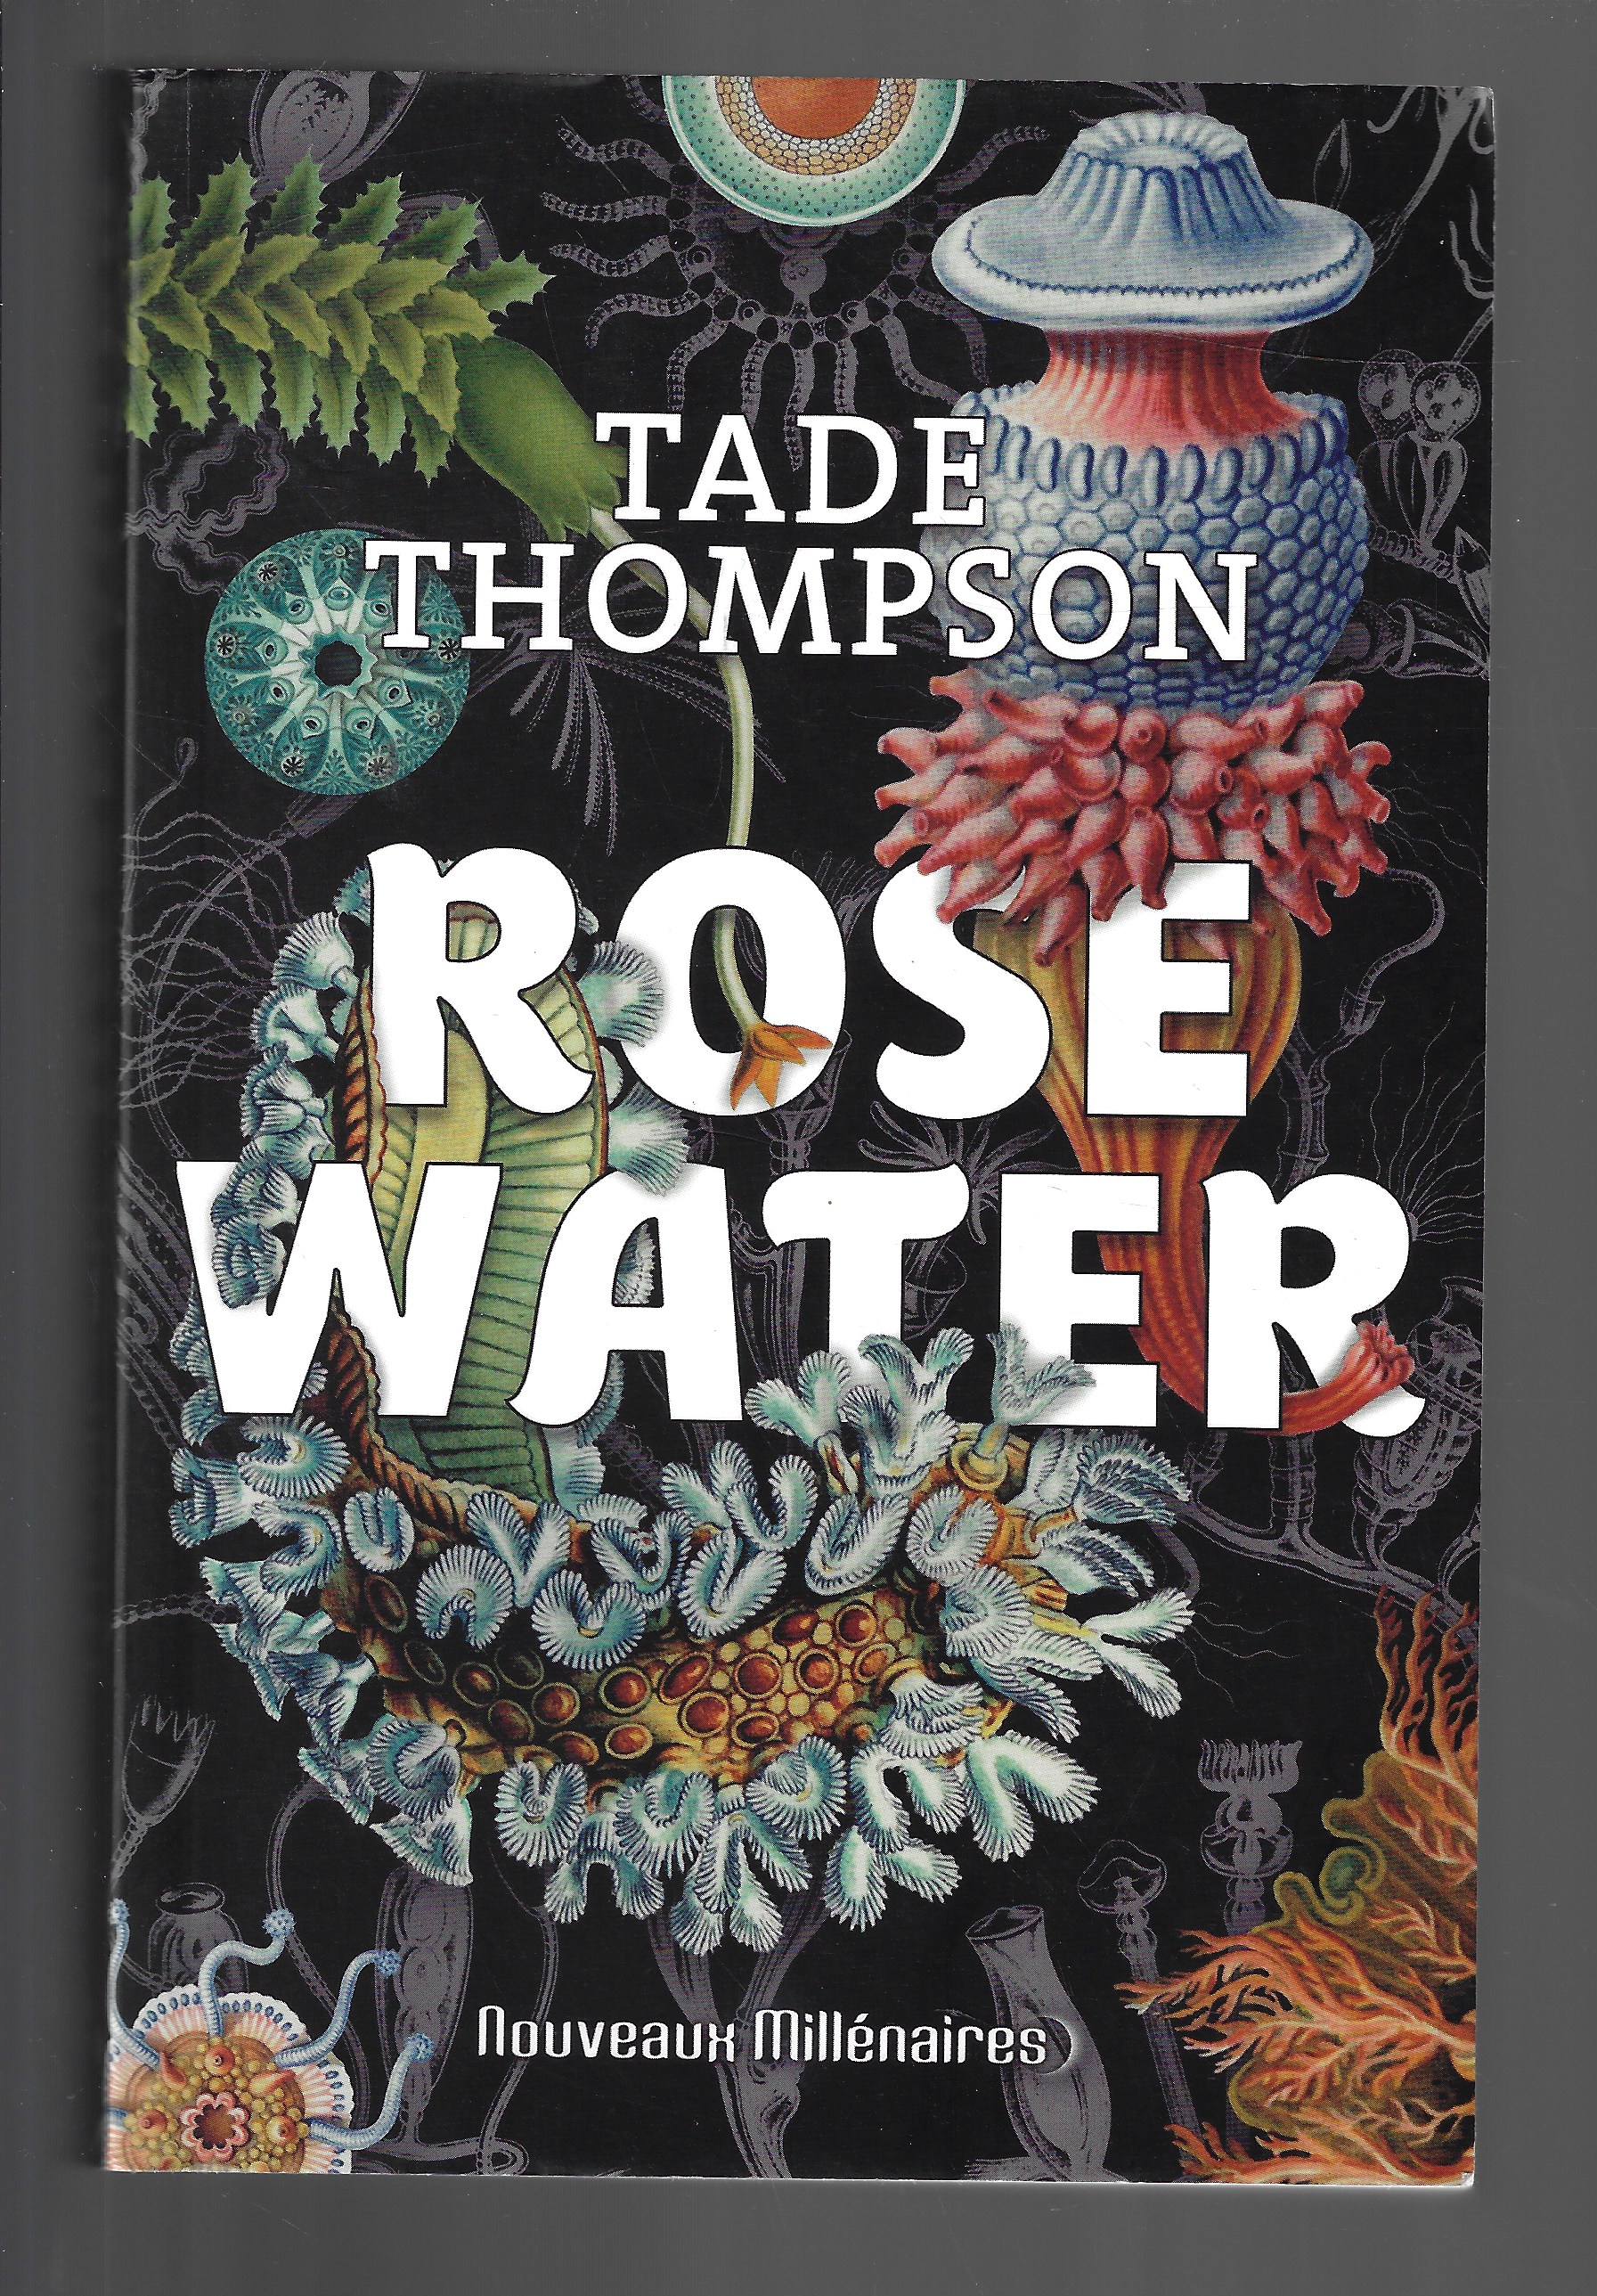 Rosewater : Tome 1 - Tade Thompson